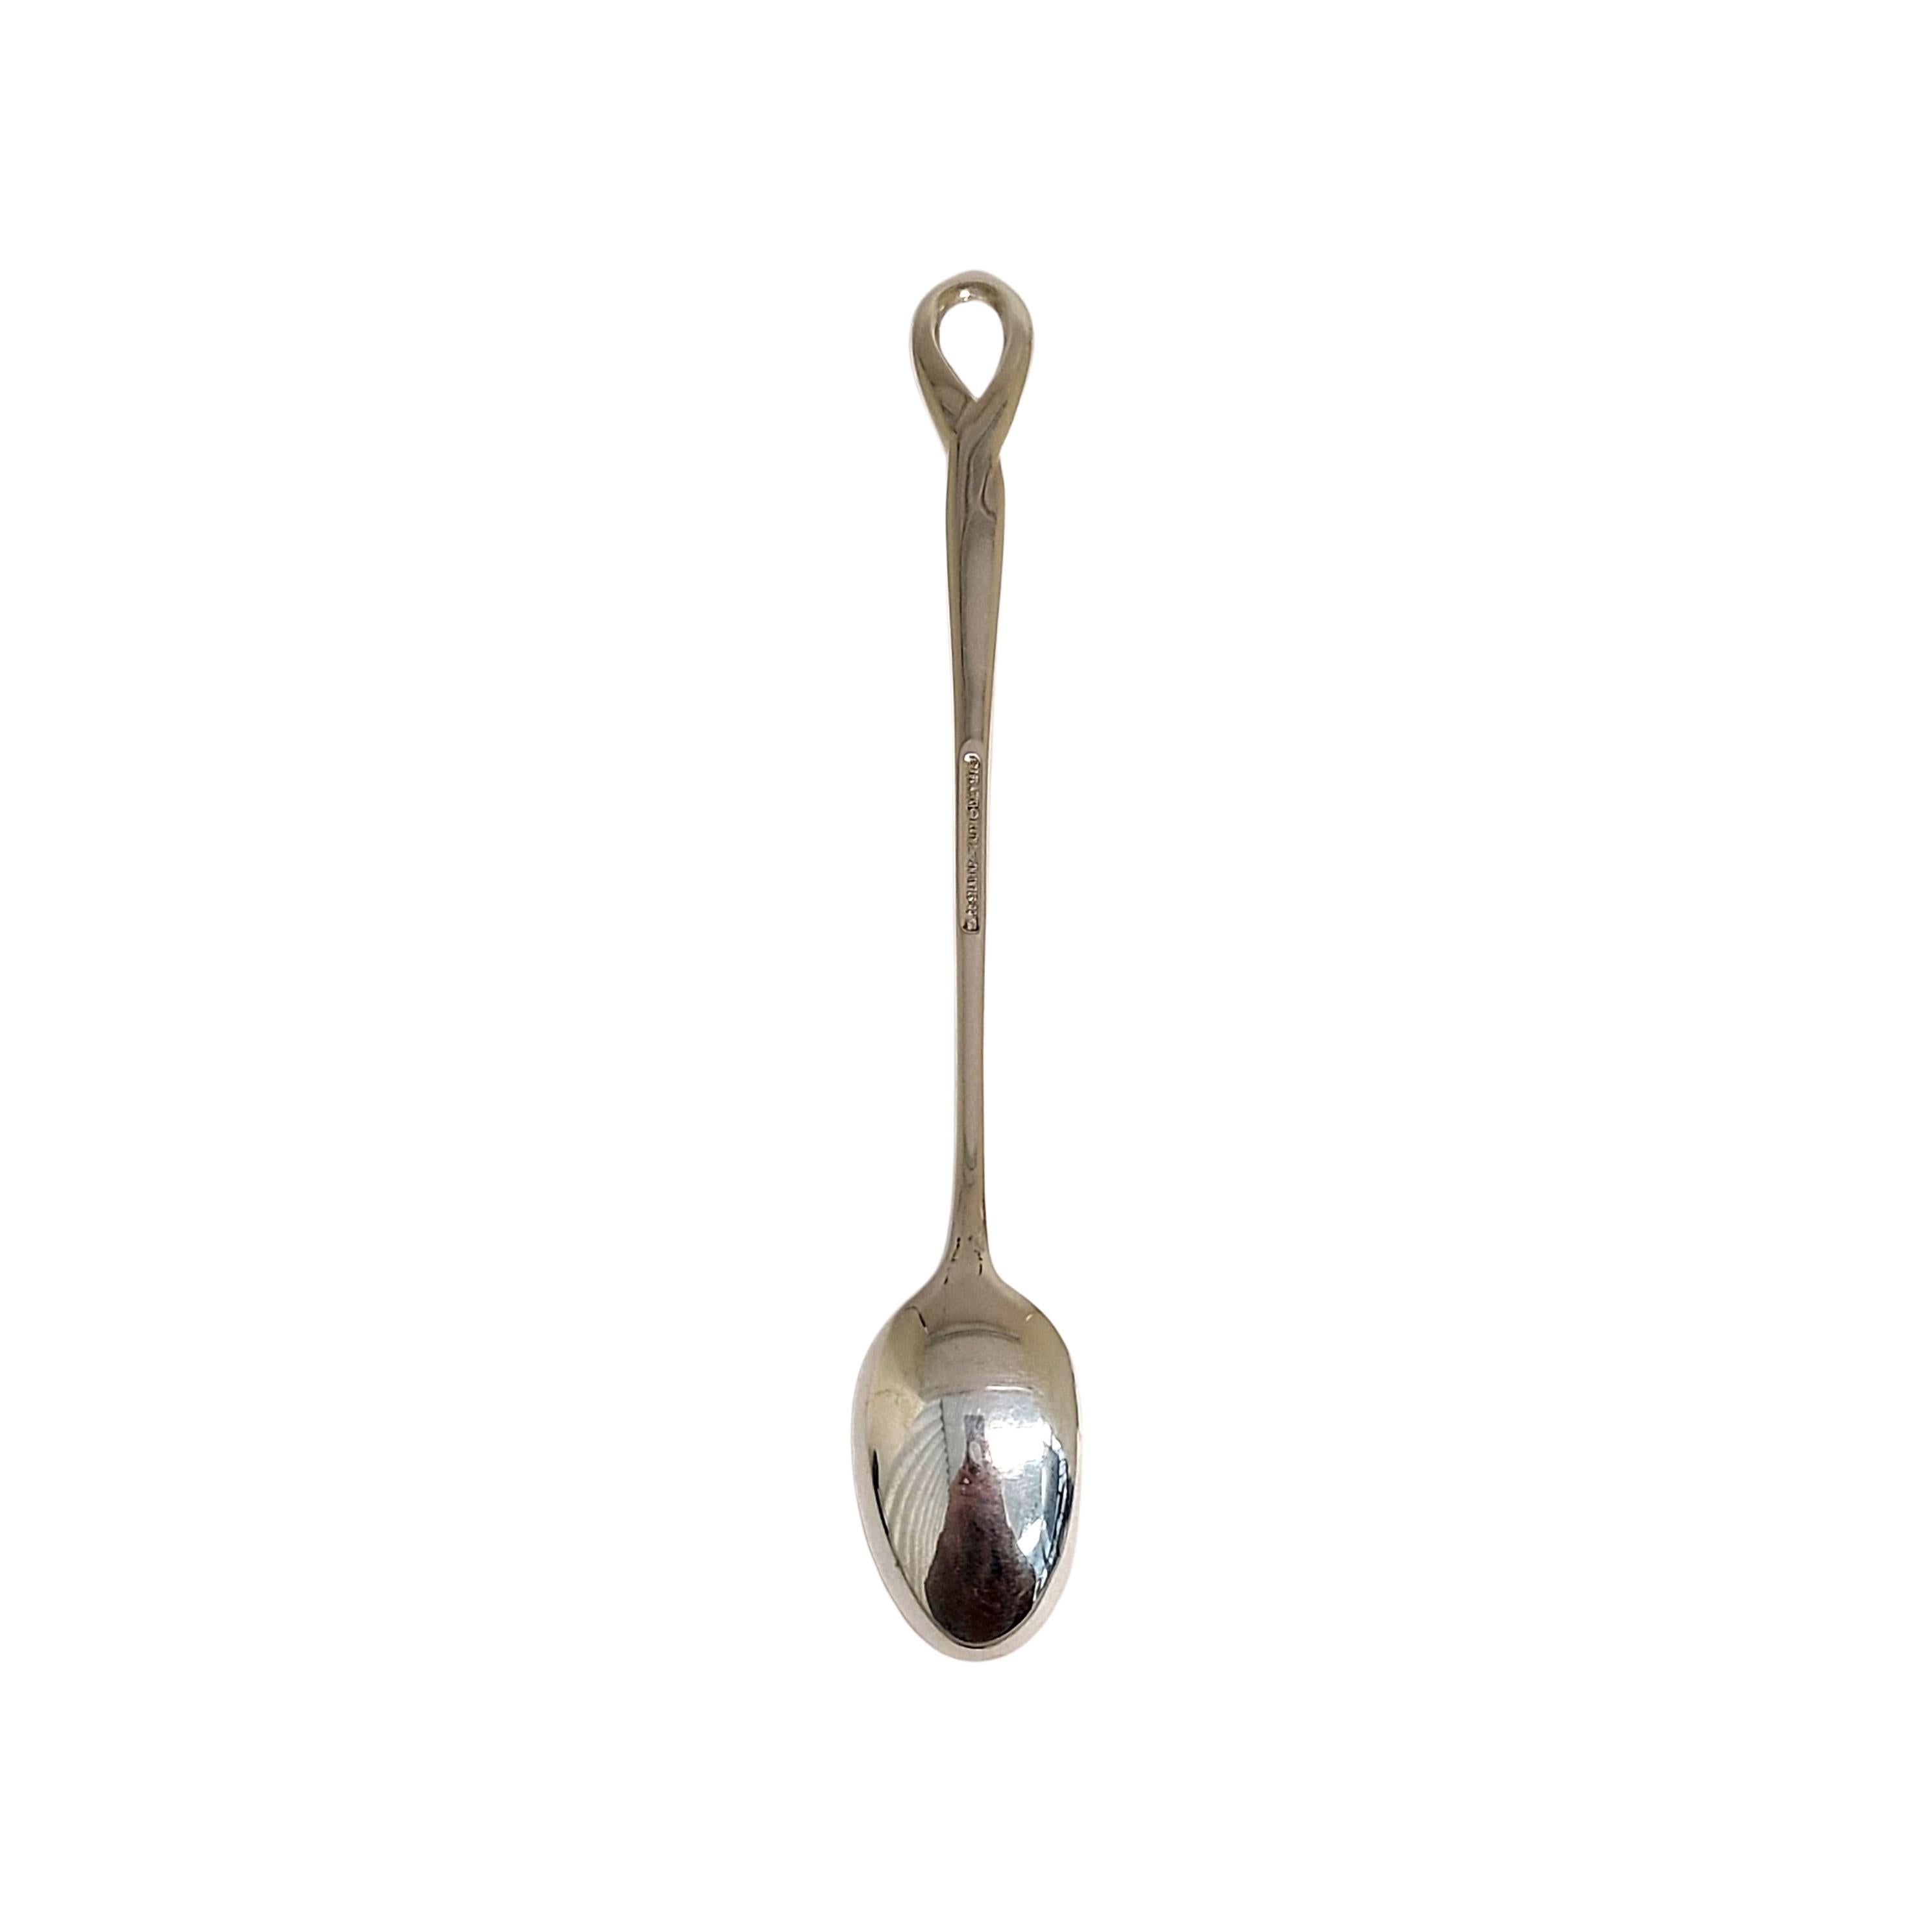 Tiffany & Co sterling silver baby feeding spoon in the Padova pattern by Elsa Peretti.

No monogram

Padova is a simple and classic design featuring a loop at the top of the handle, named for the Italian city in which it was created in. Does not